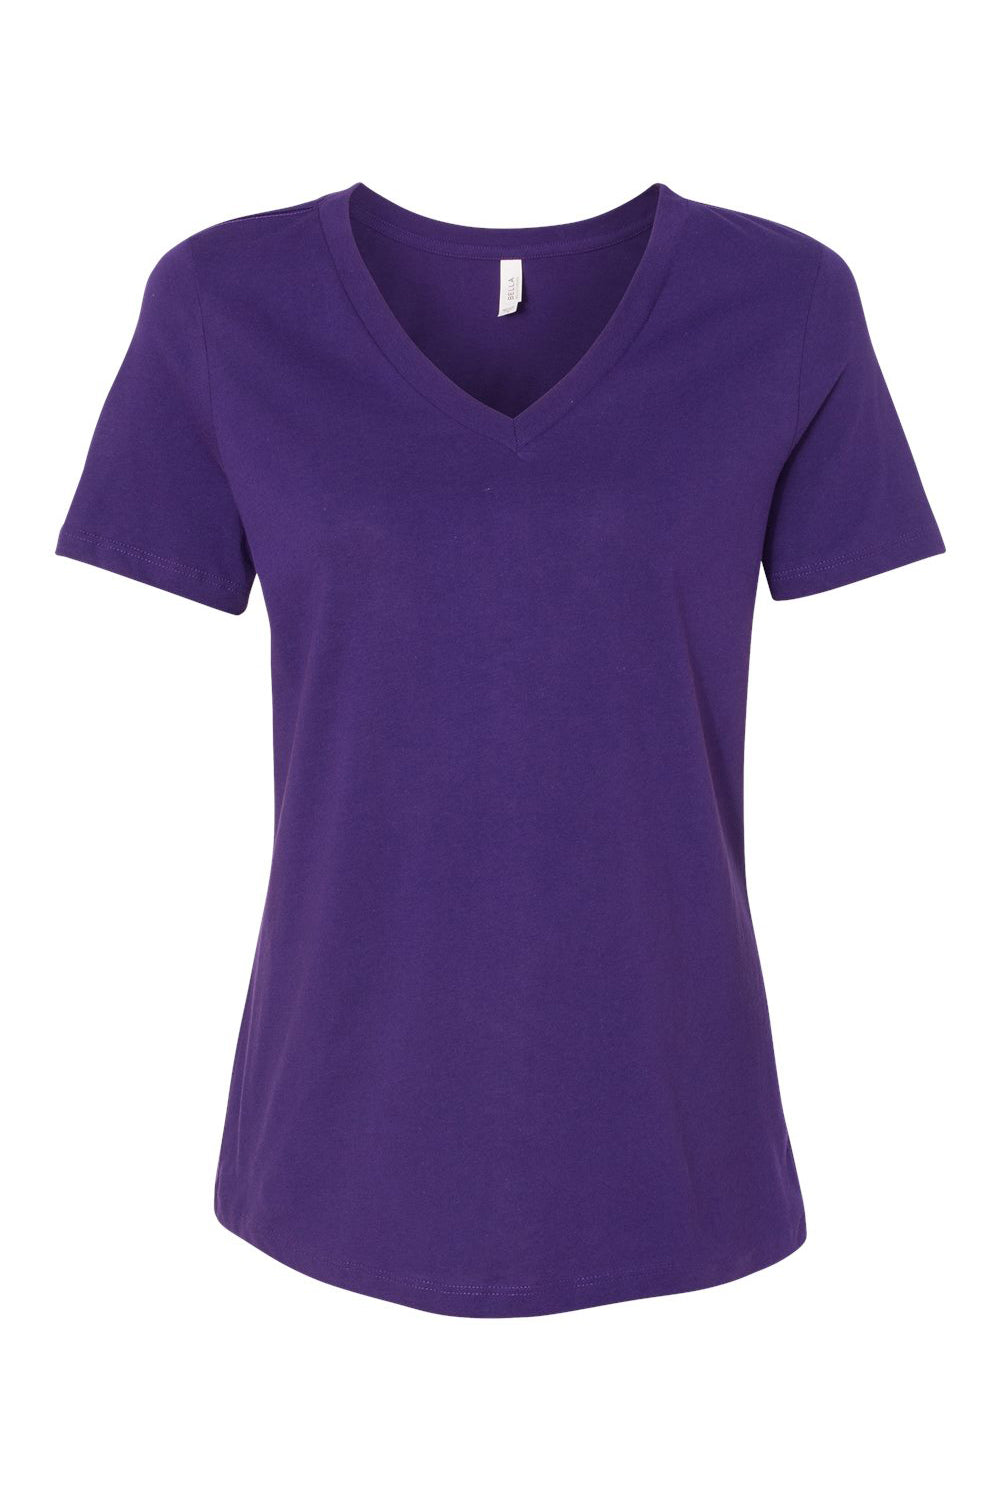 Bella + Canvas BC6405/6405 Womens Relaxed Jersey Short Sleeve V-Neck T-Shirt Team Purple Flat Front